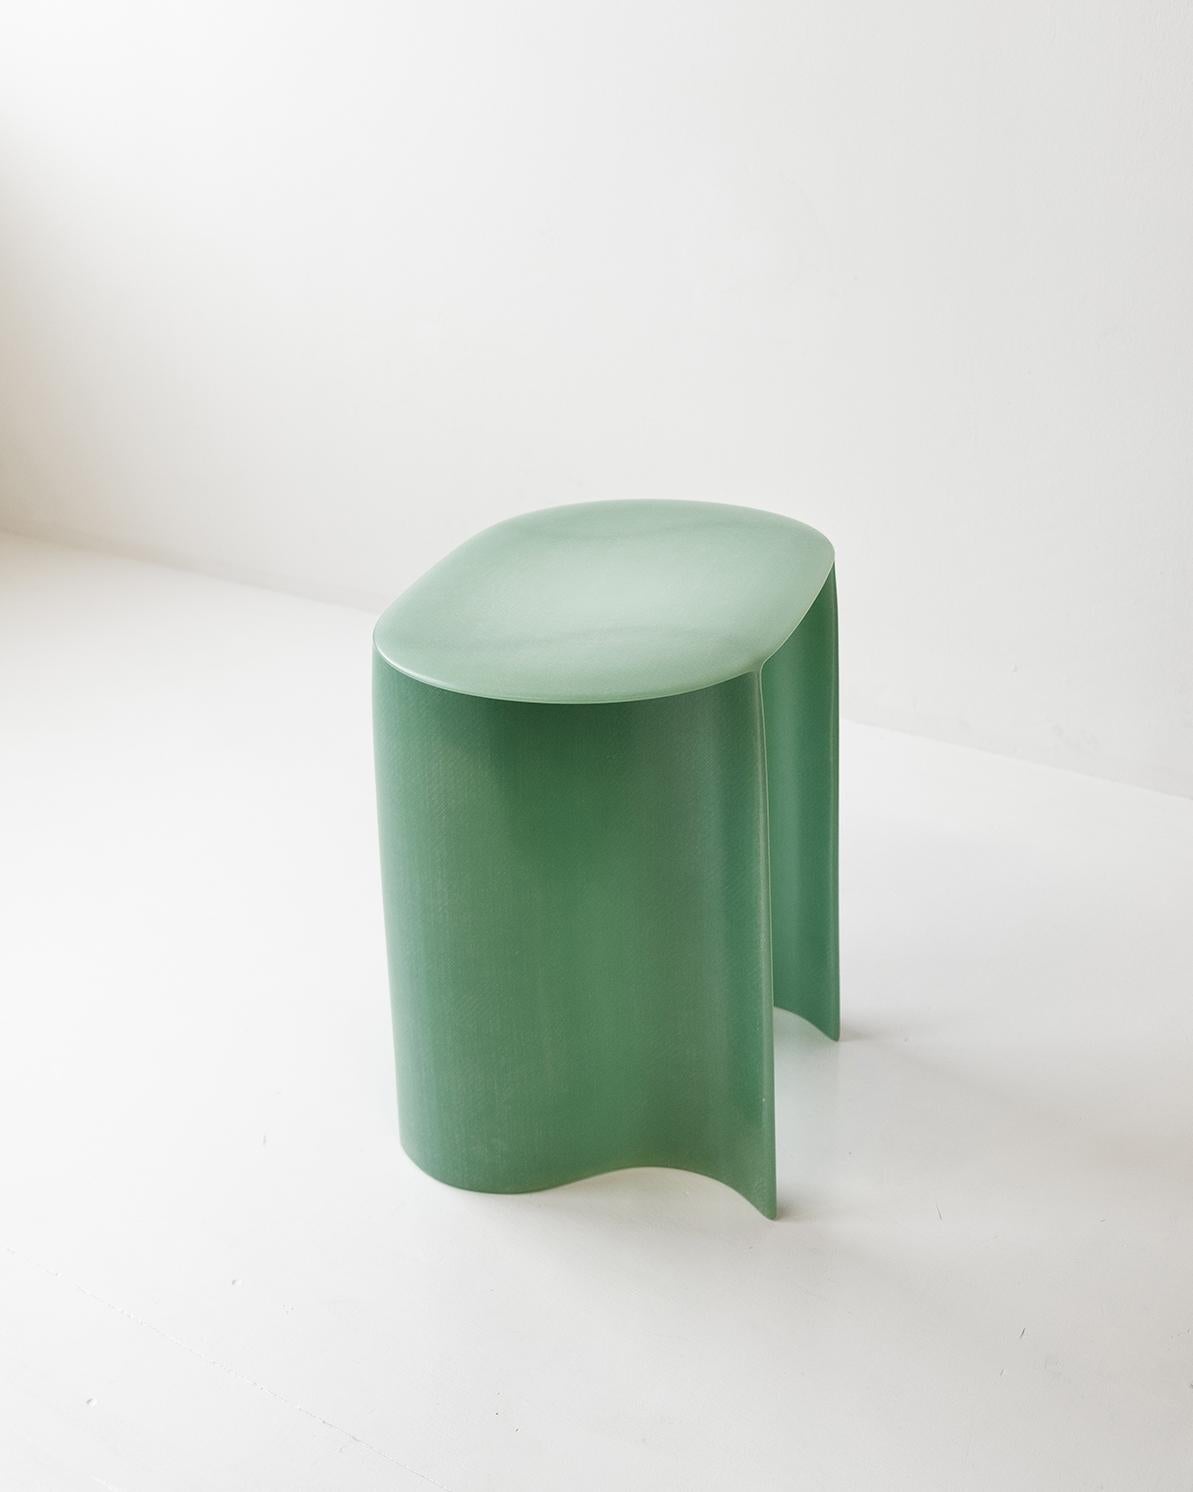 Resin Contemporary light green Fiberglass, New Wave Side Table, by Lukas Cober